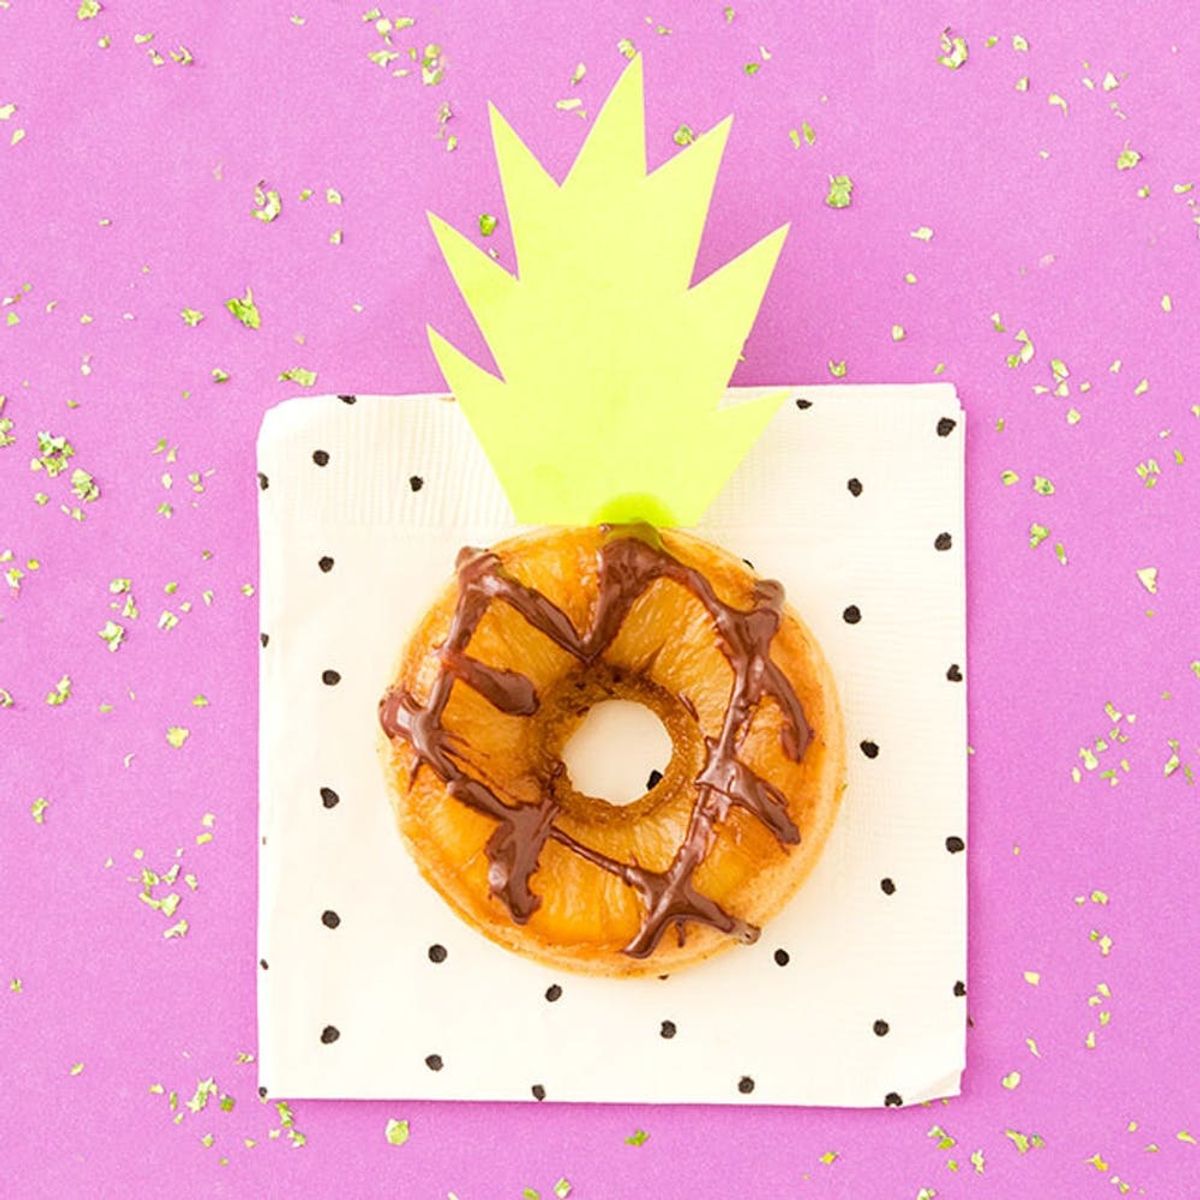 Celebrate Pineapple Upside Down Cake Day With Donuts!